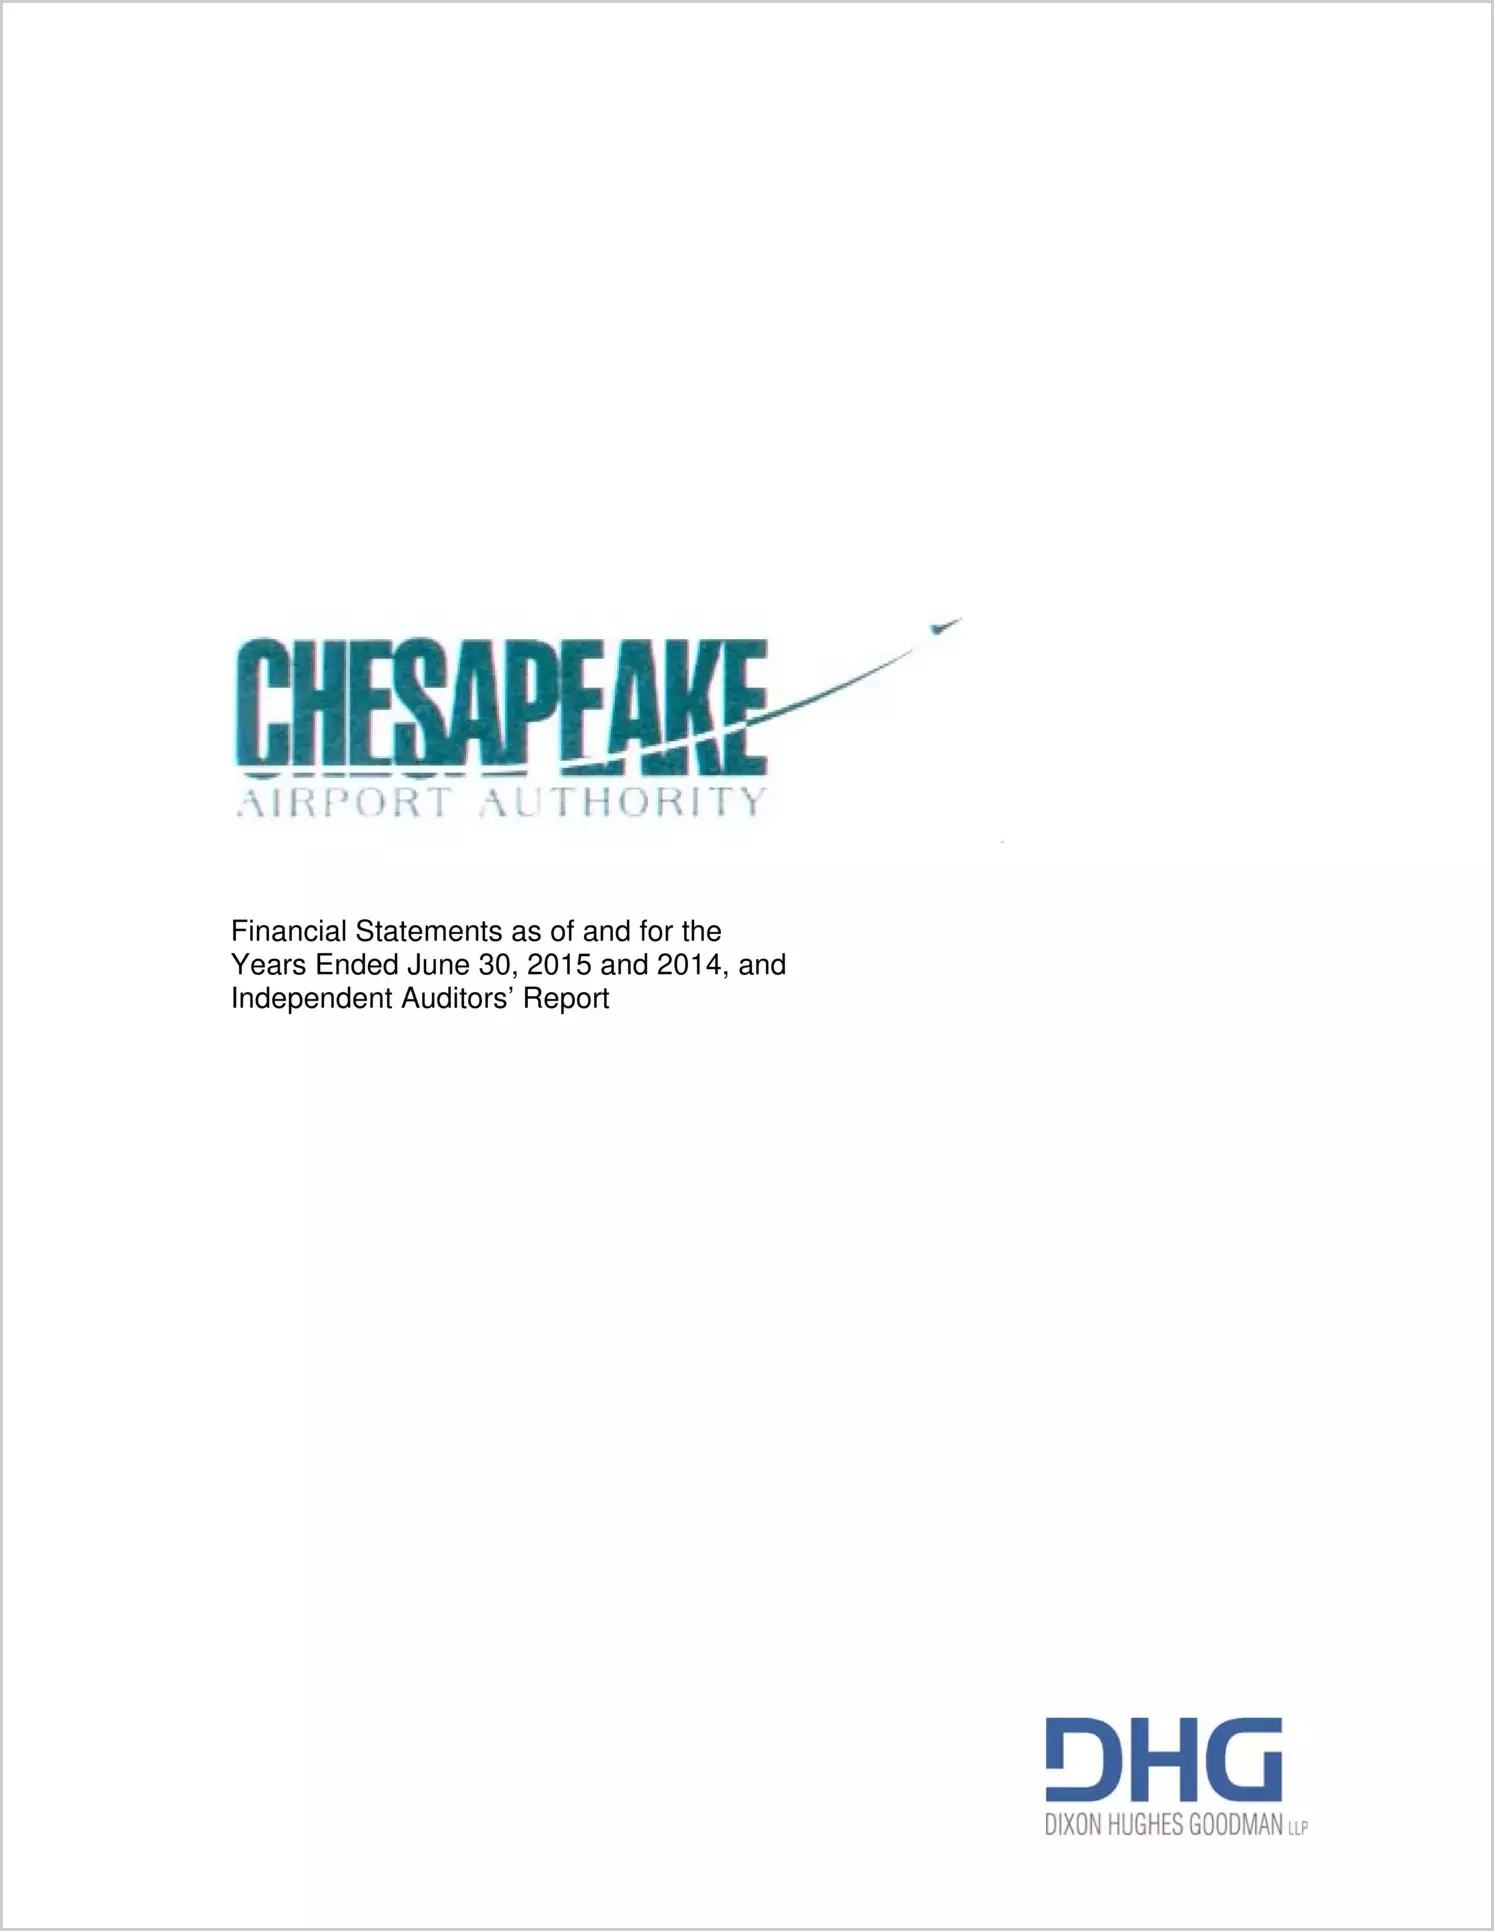 2015 ABC/Other Annual Financial Report  for Chesapeake Airport Authority